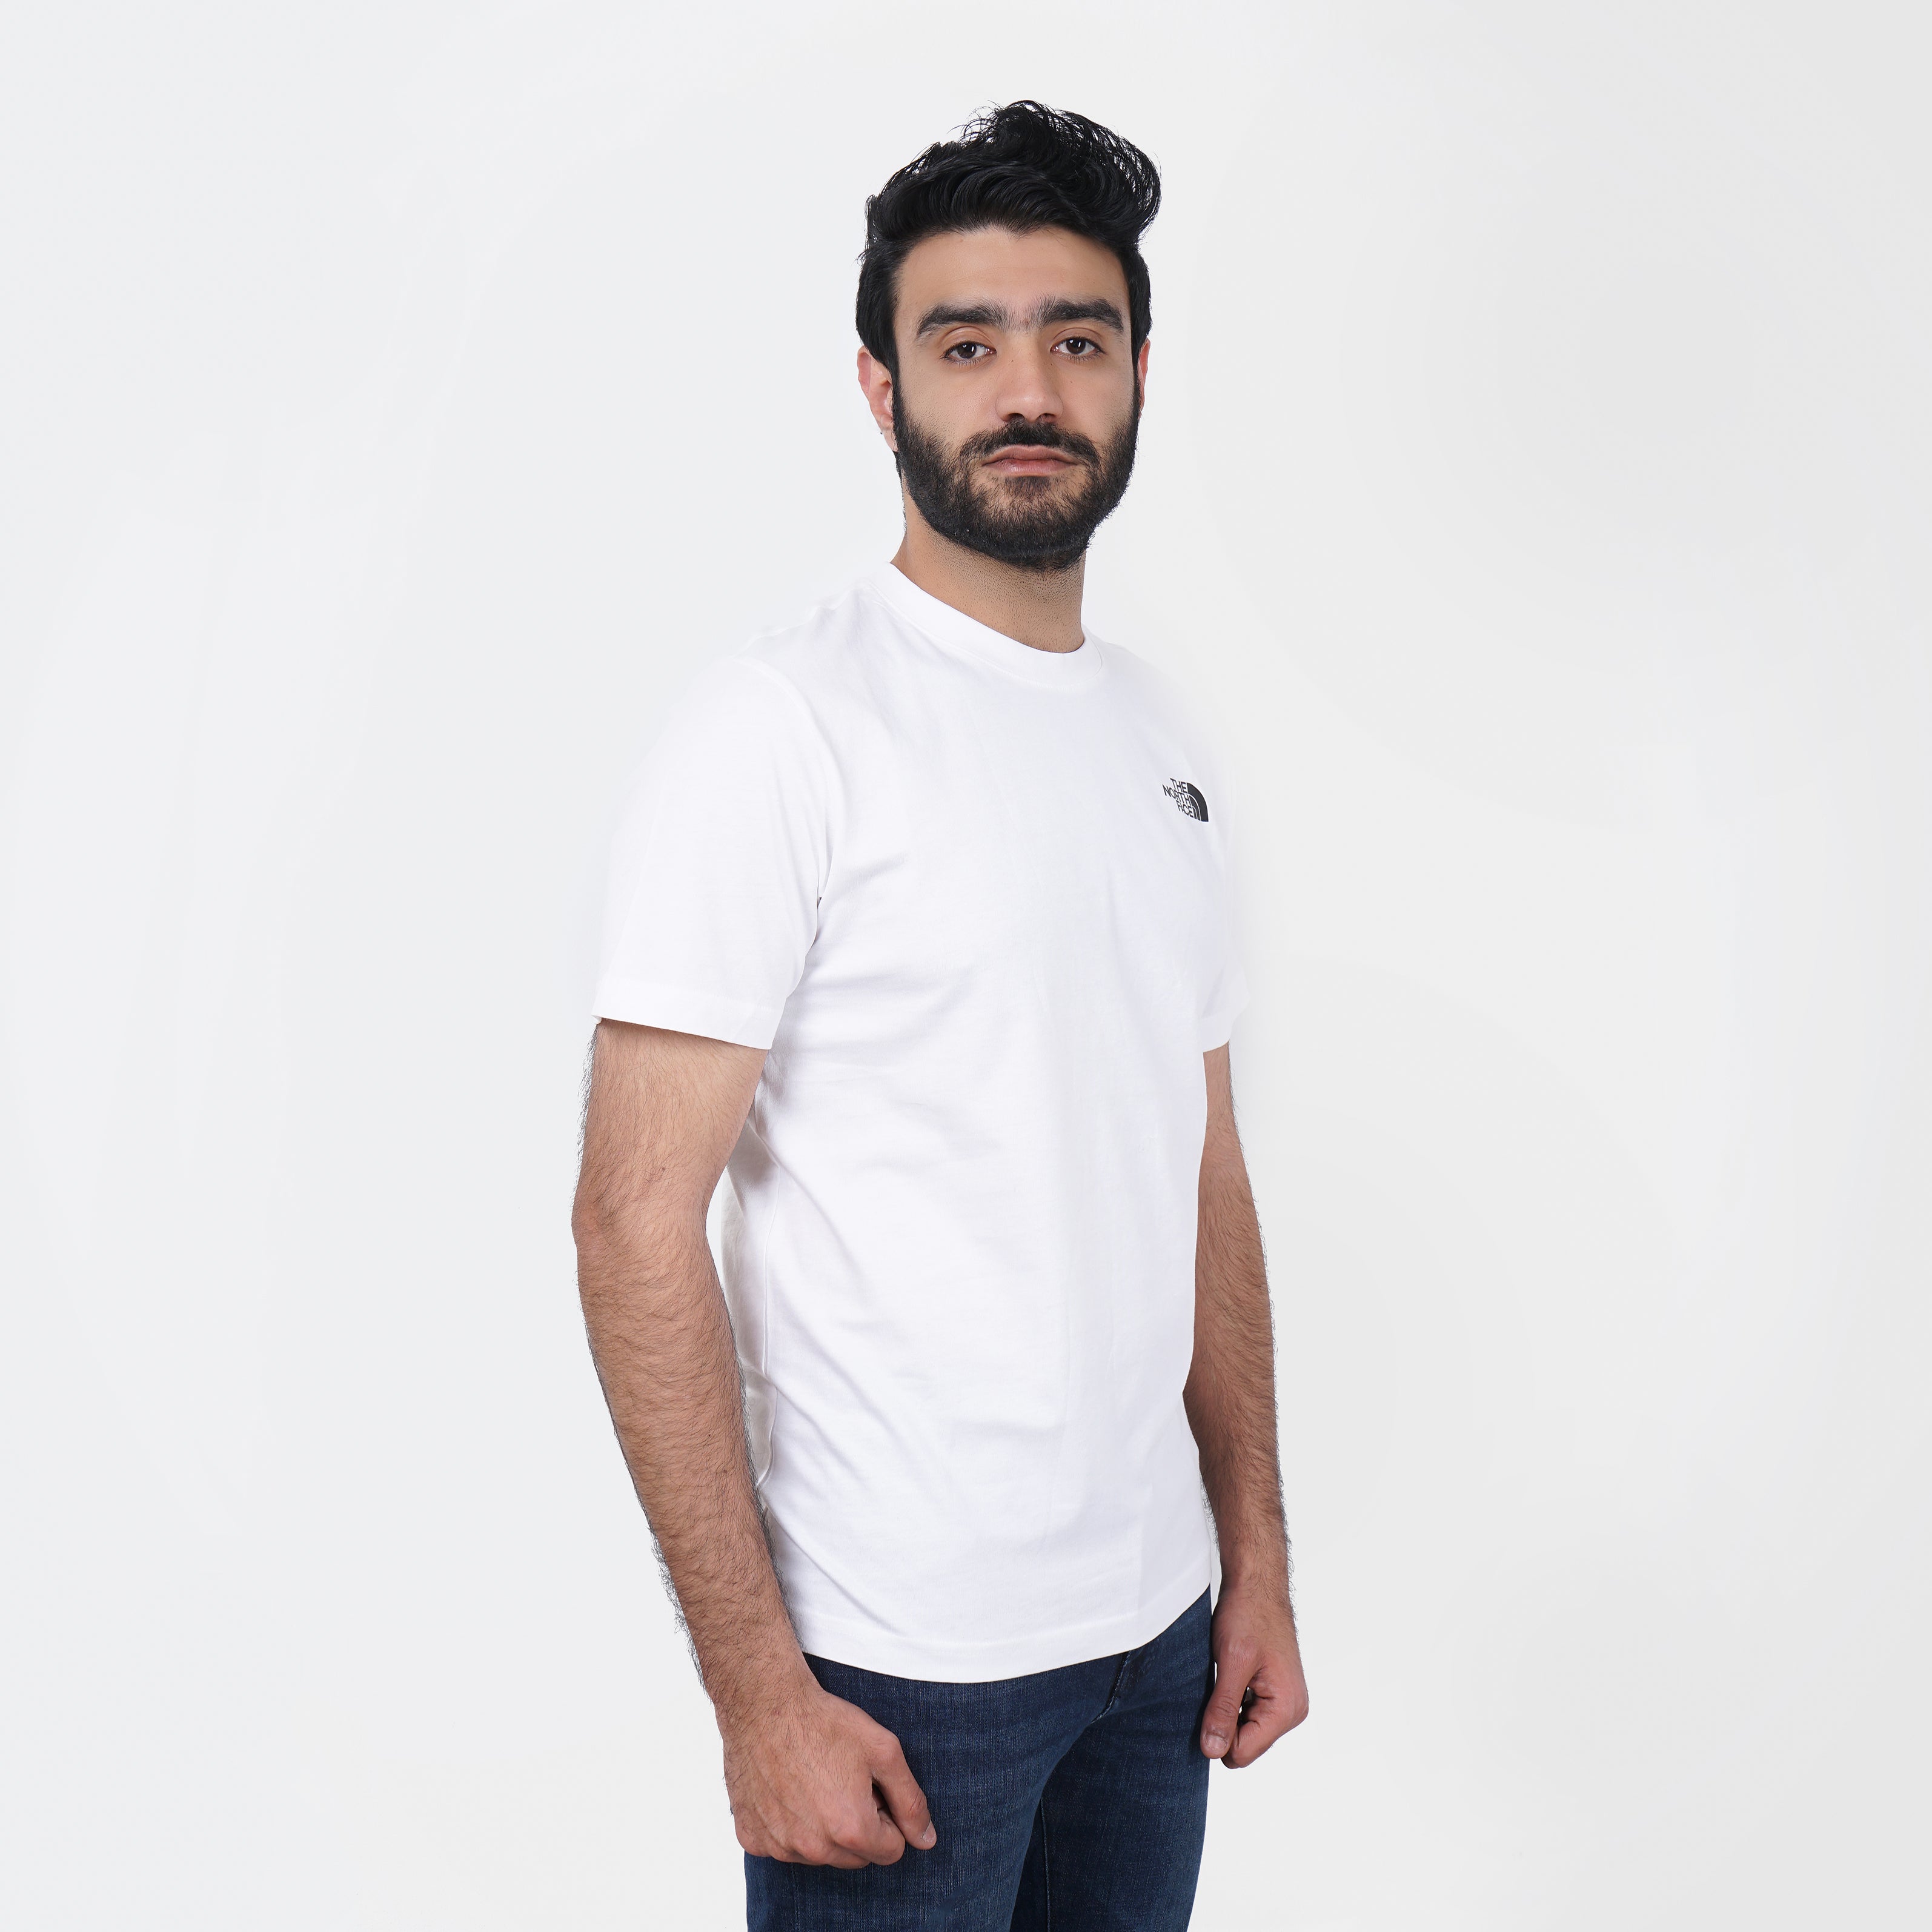 Man wearing a plain white North Face t-shirt and jeans standing against a white background.